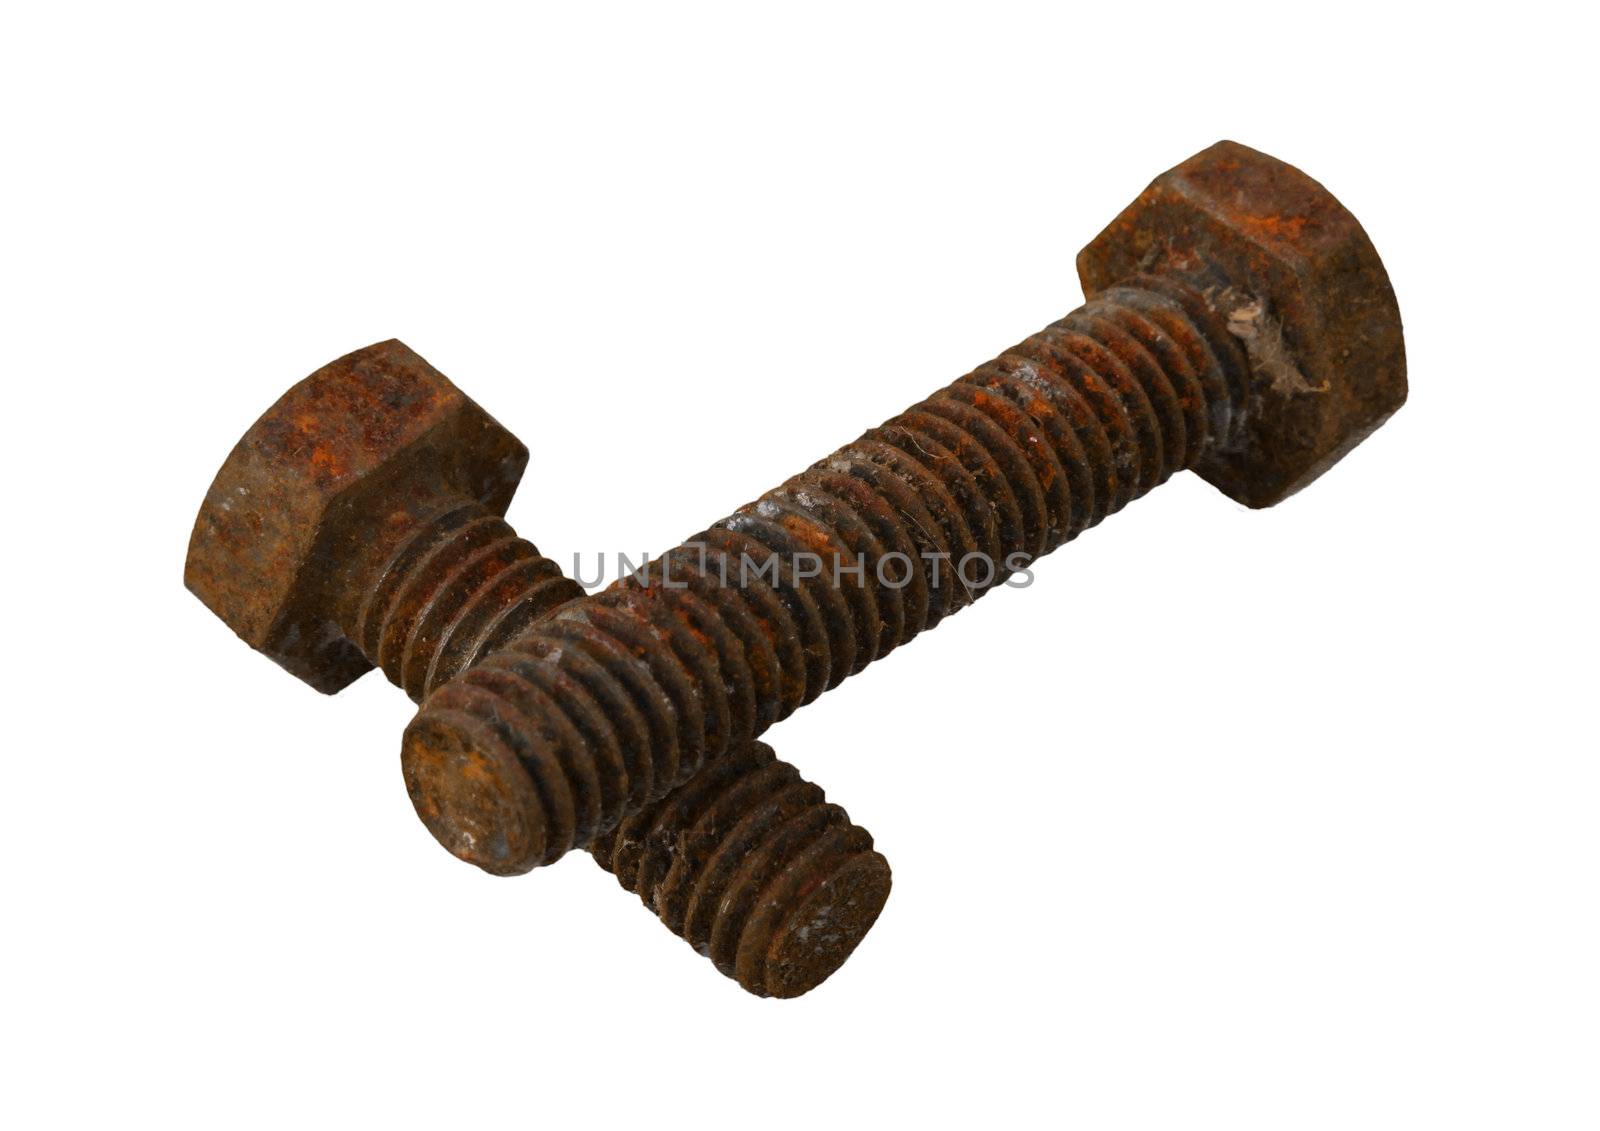 Rusty bolts on a plain white background.